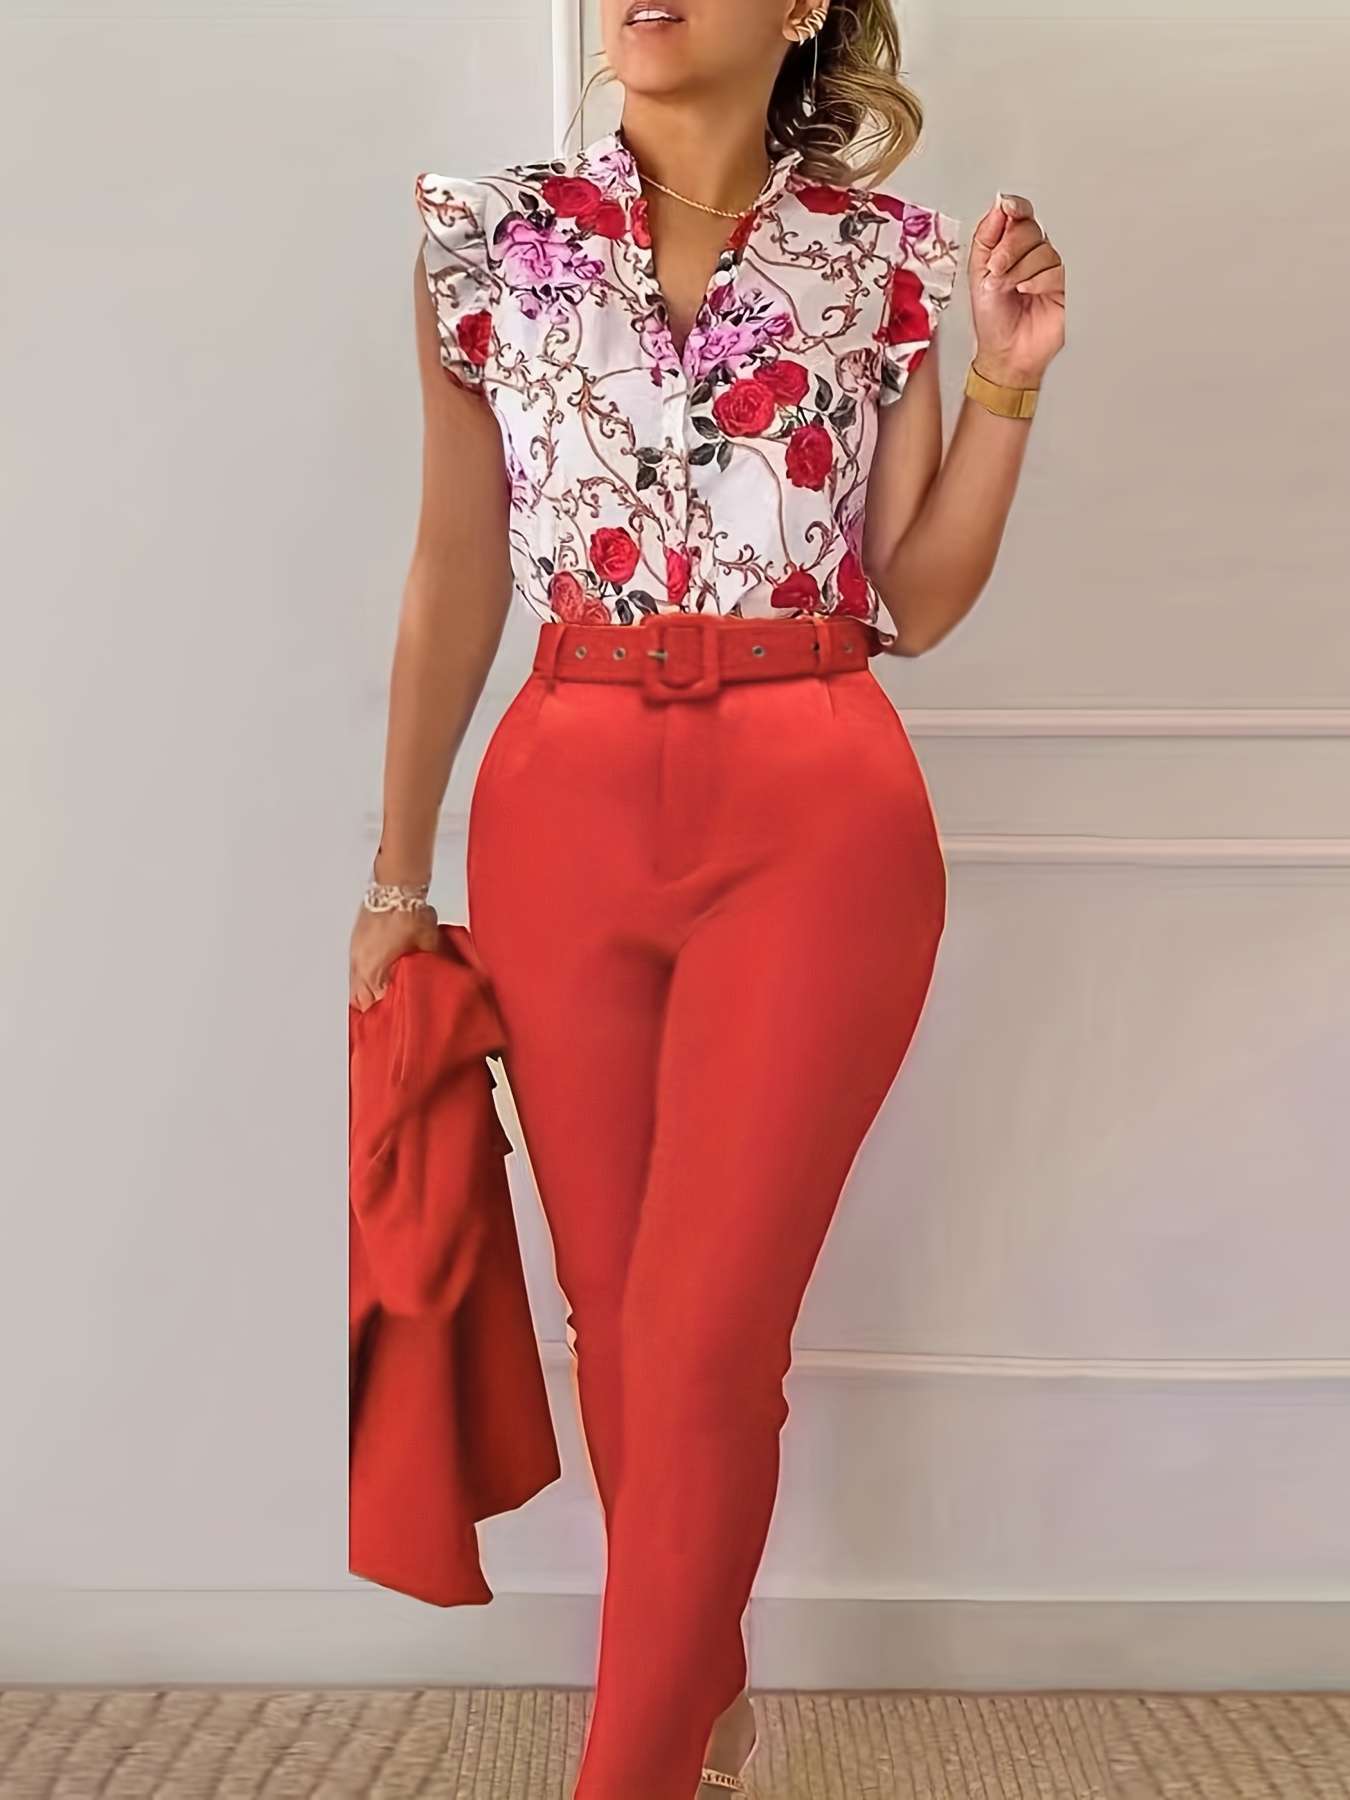 Ruffle Pants Outfit, 2 Pieces